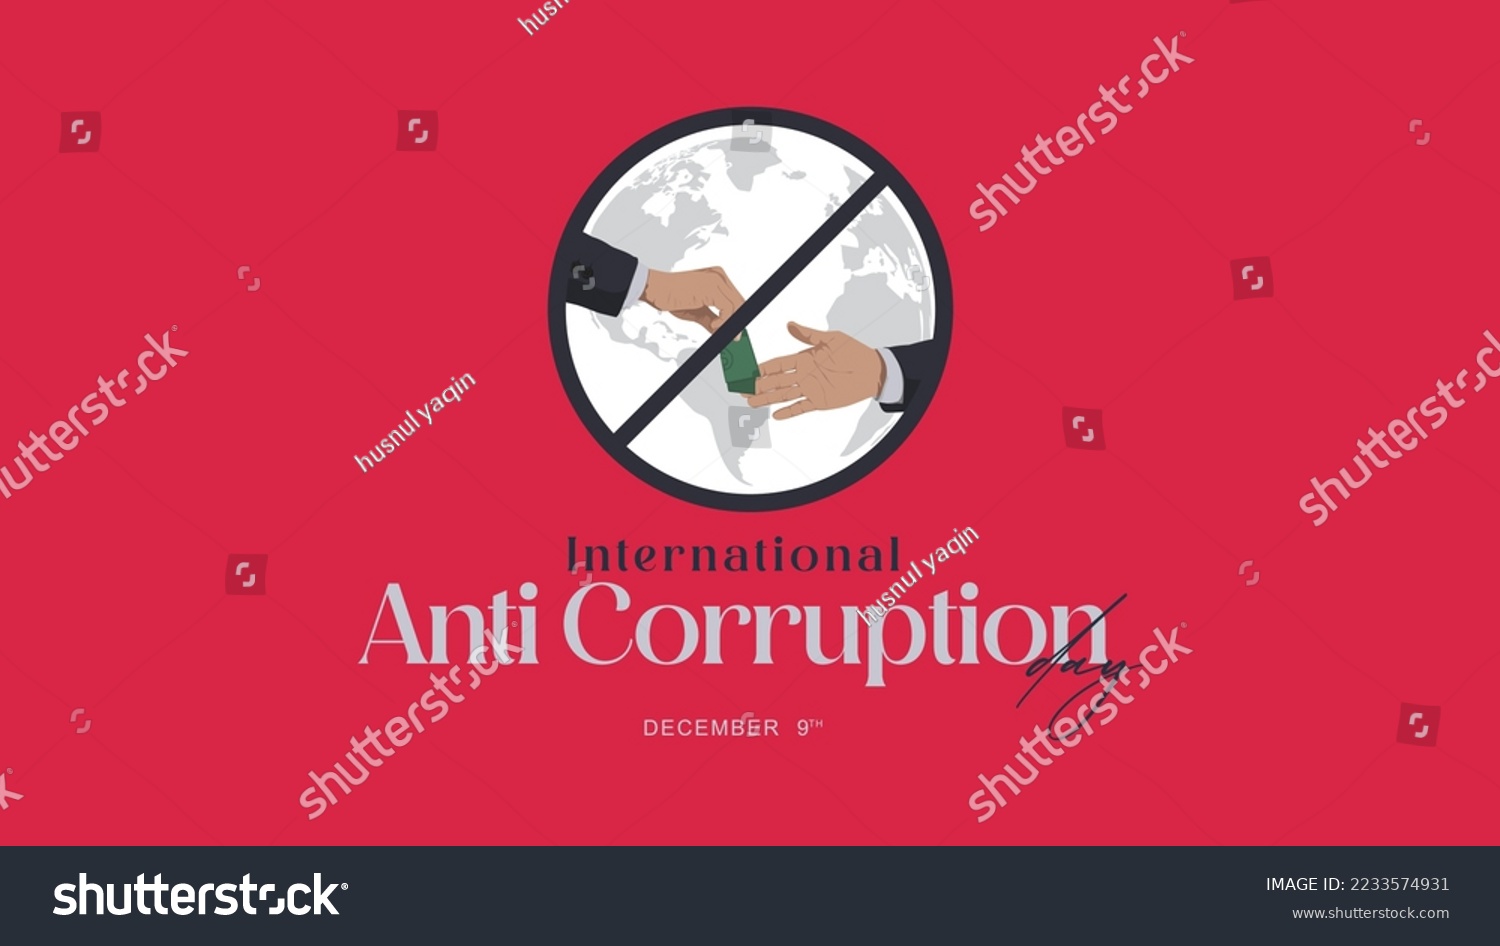 SVG of International Anti Corruption Day. Red color background. Hand Vector Illustration is bribing or corruption. Celebrating Anti-Corruption Day on December 9th. Suitable for banners, social media, posters svg